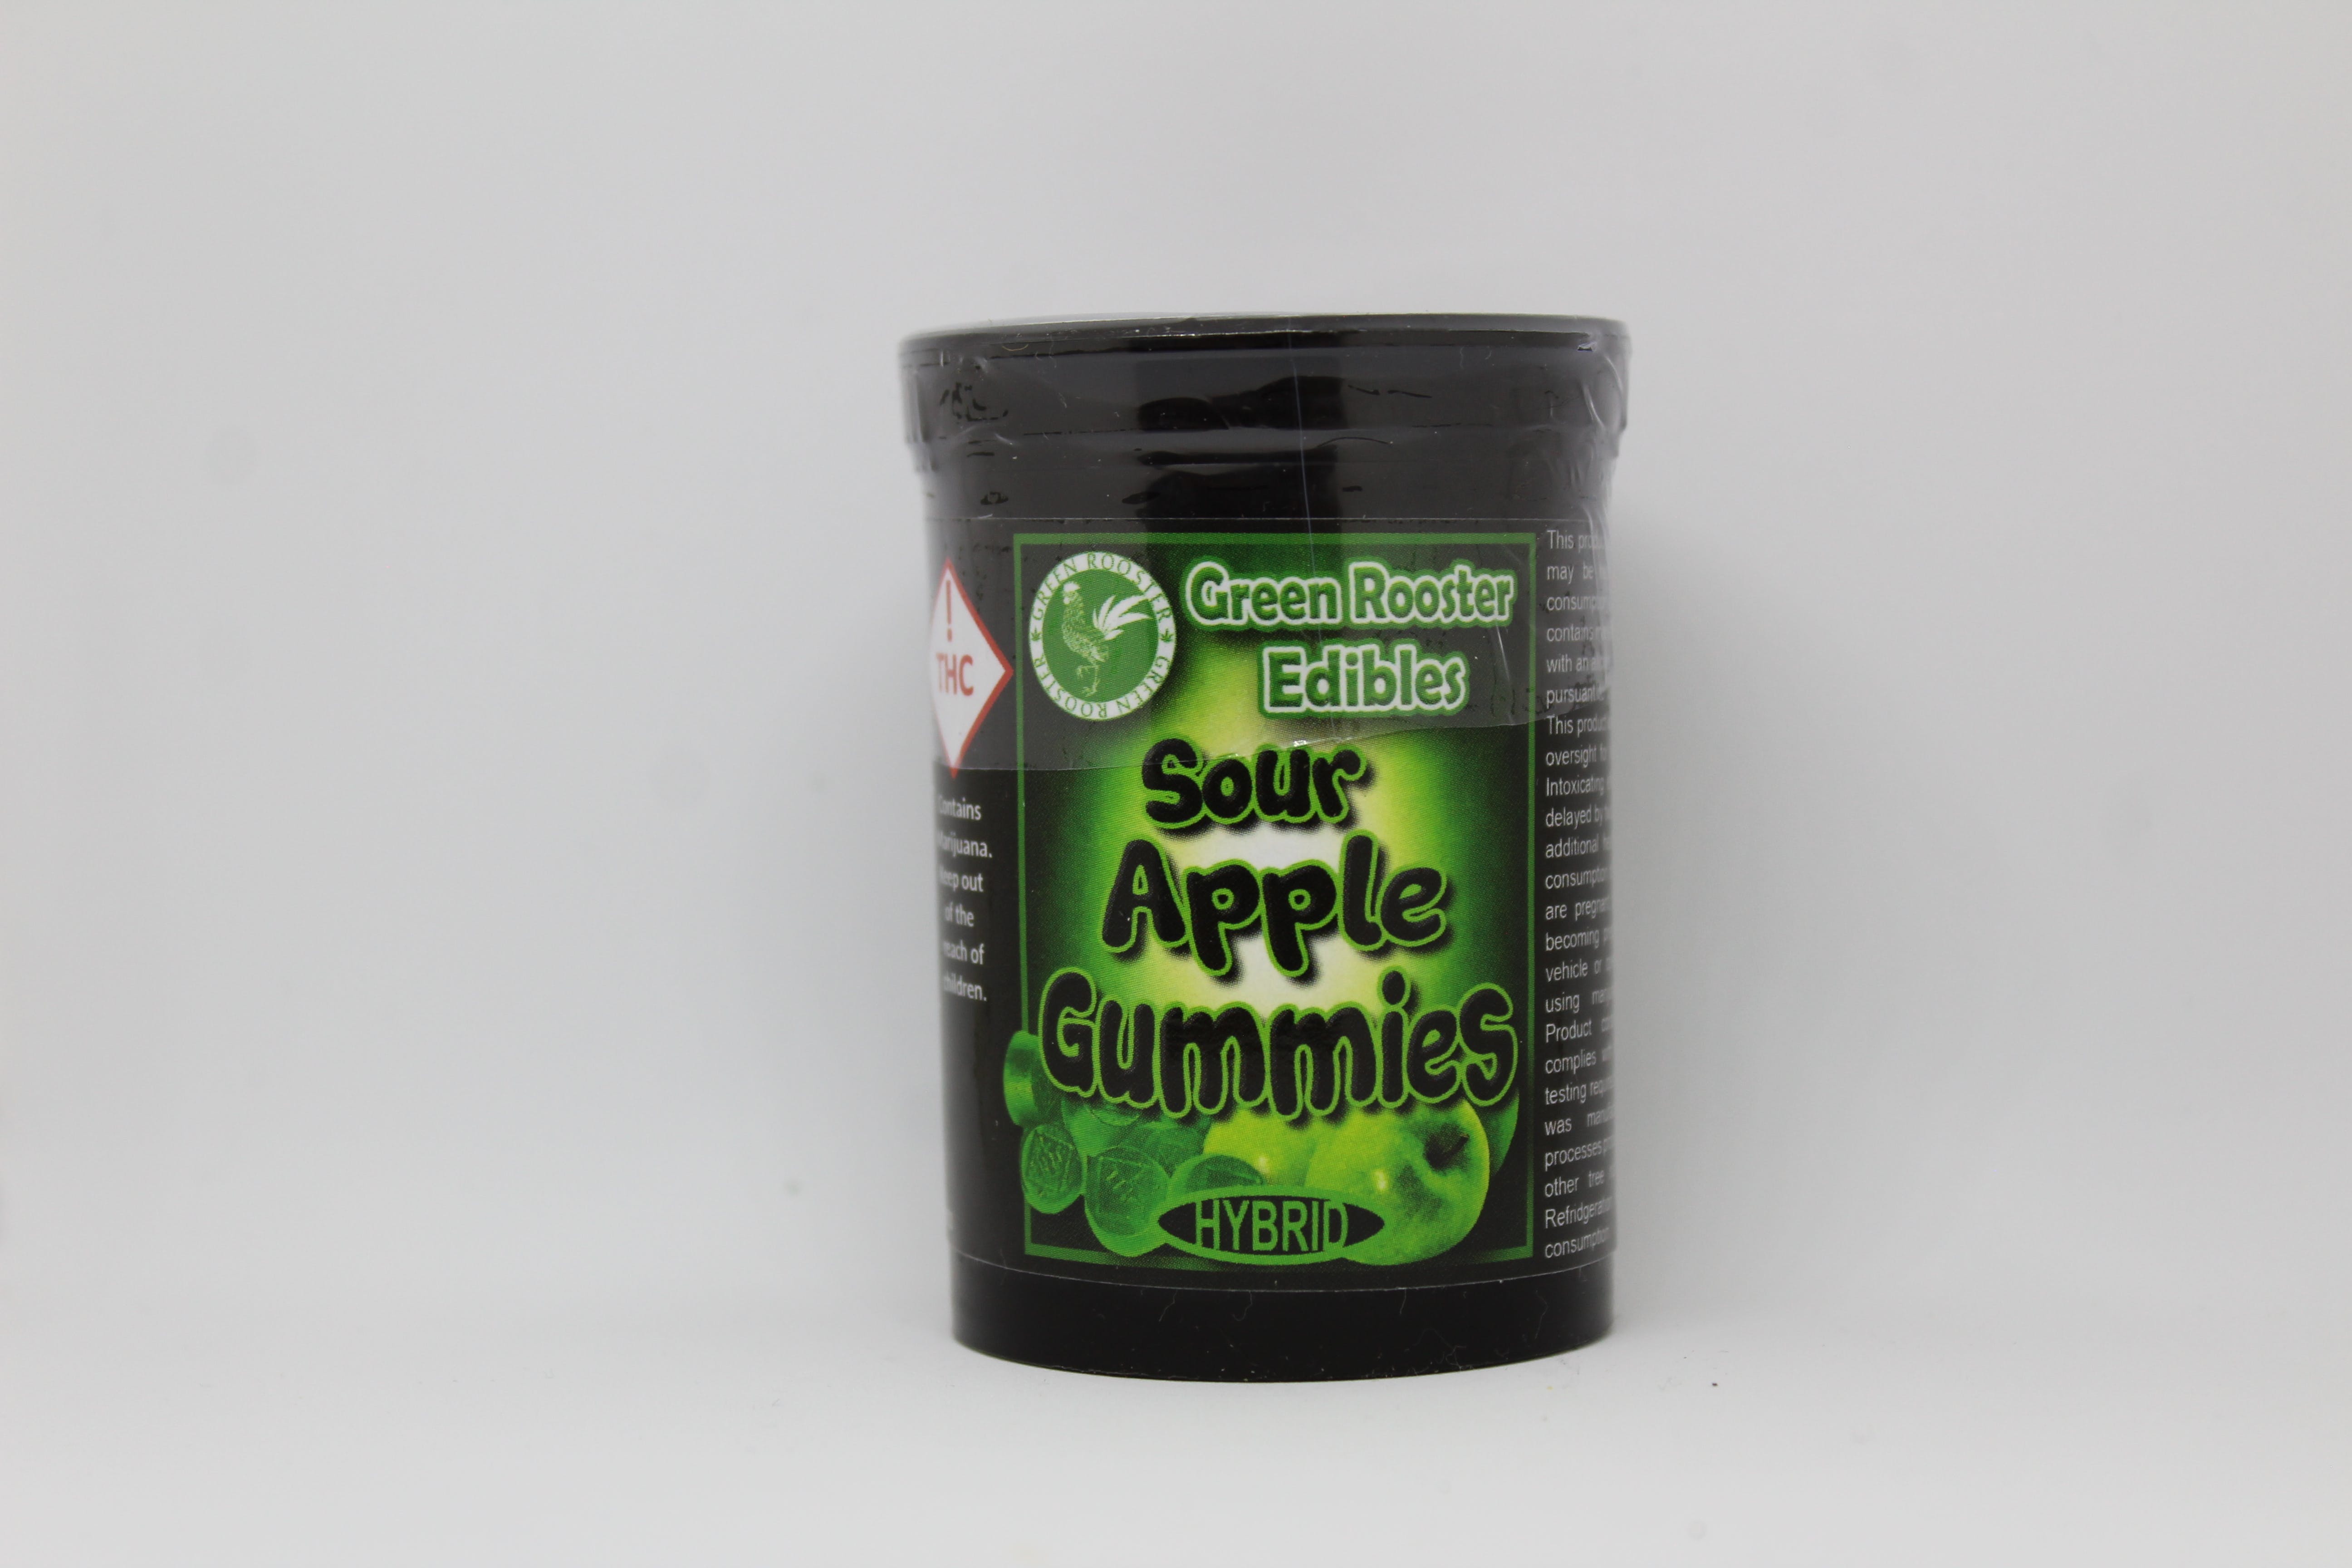 edible-green-rooster-sour-apple-edible-100-mg-gummies-tax-included